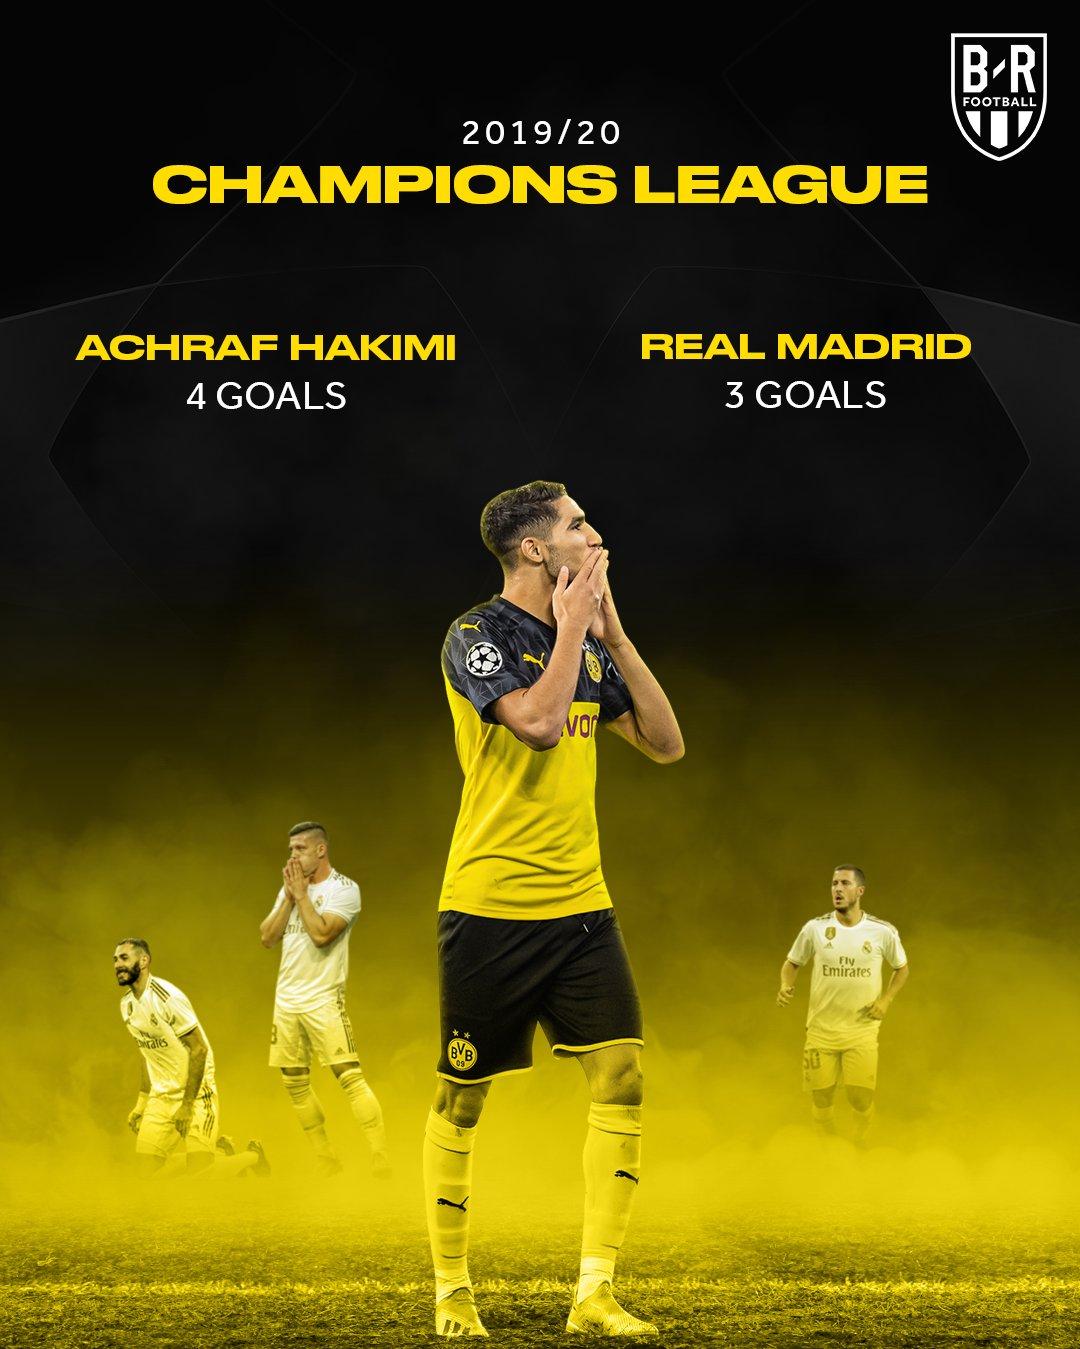 Achraf Hakimi Android Wallpaper Image 1080x1350